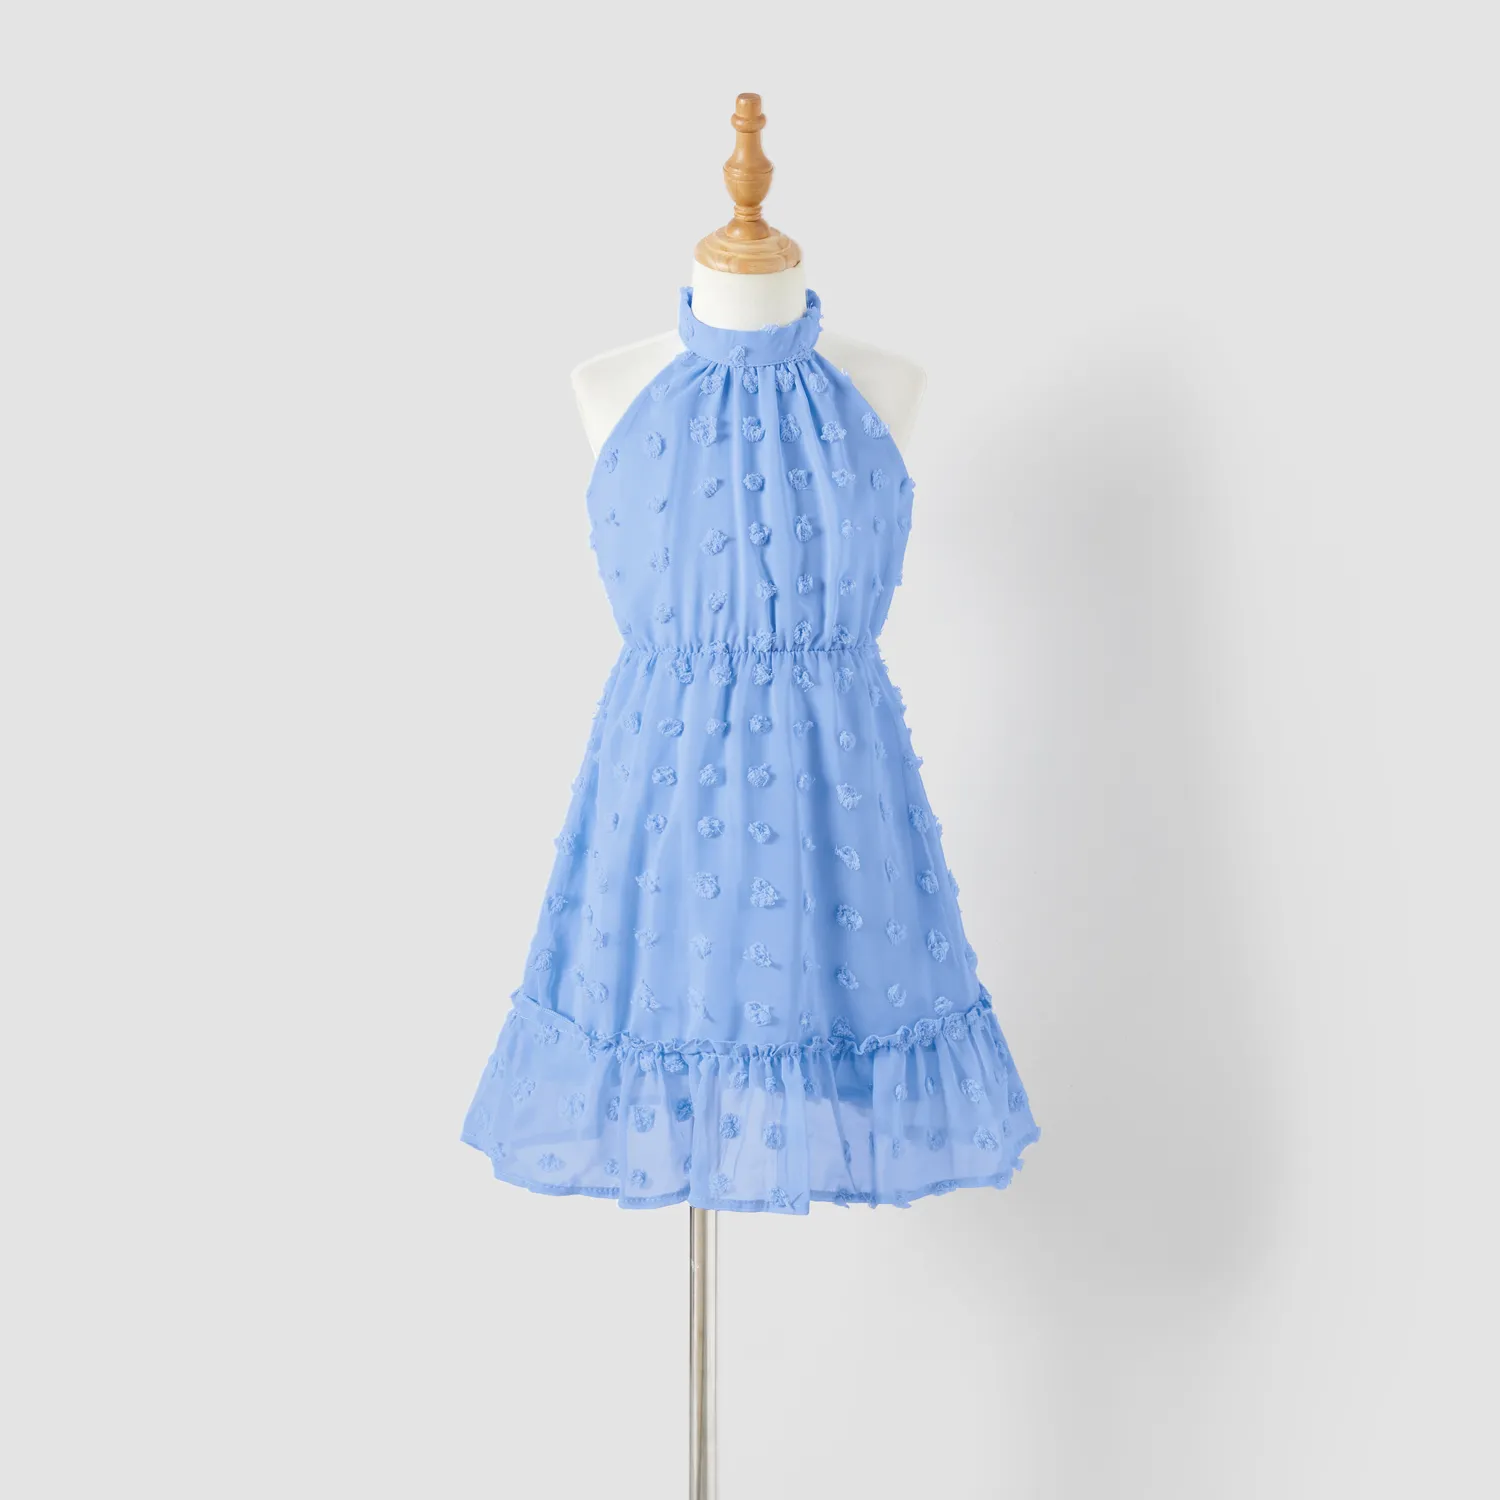 Family Matching Blue Swiss Dot Textured Halter Neck Sleeveless Dresses and Short-sleeve Striped Colo